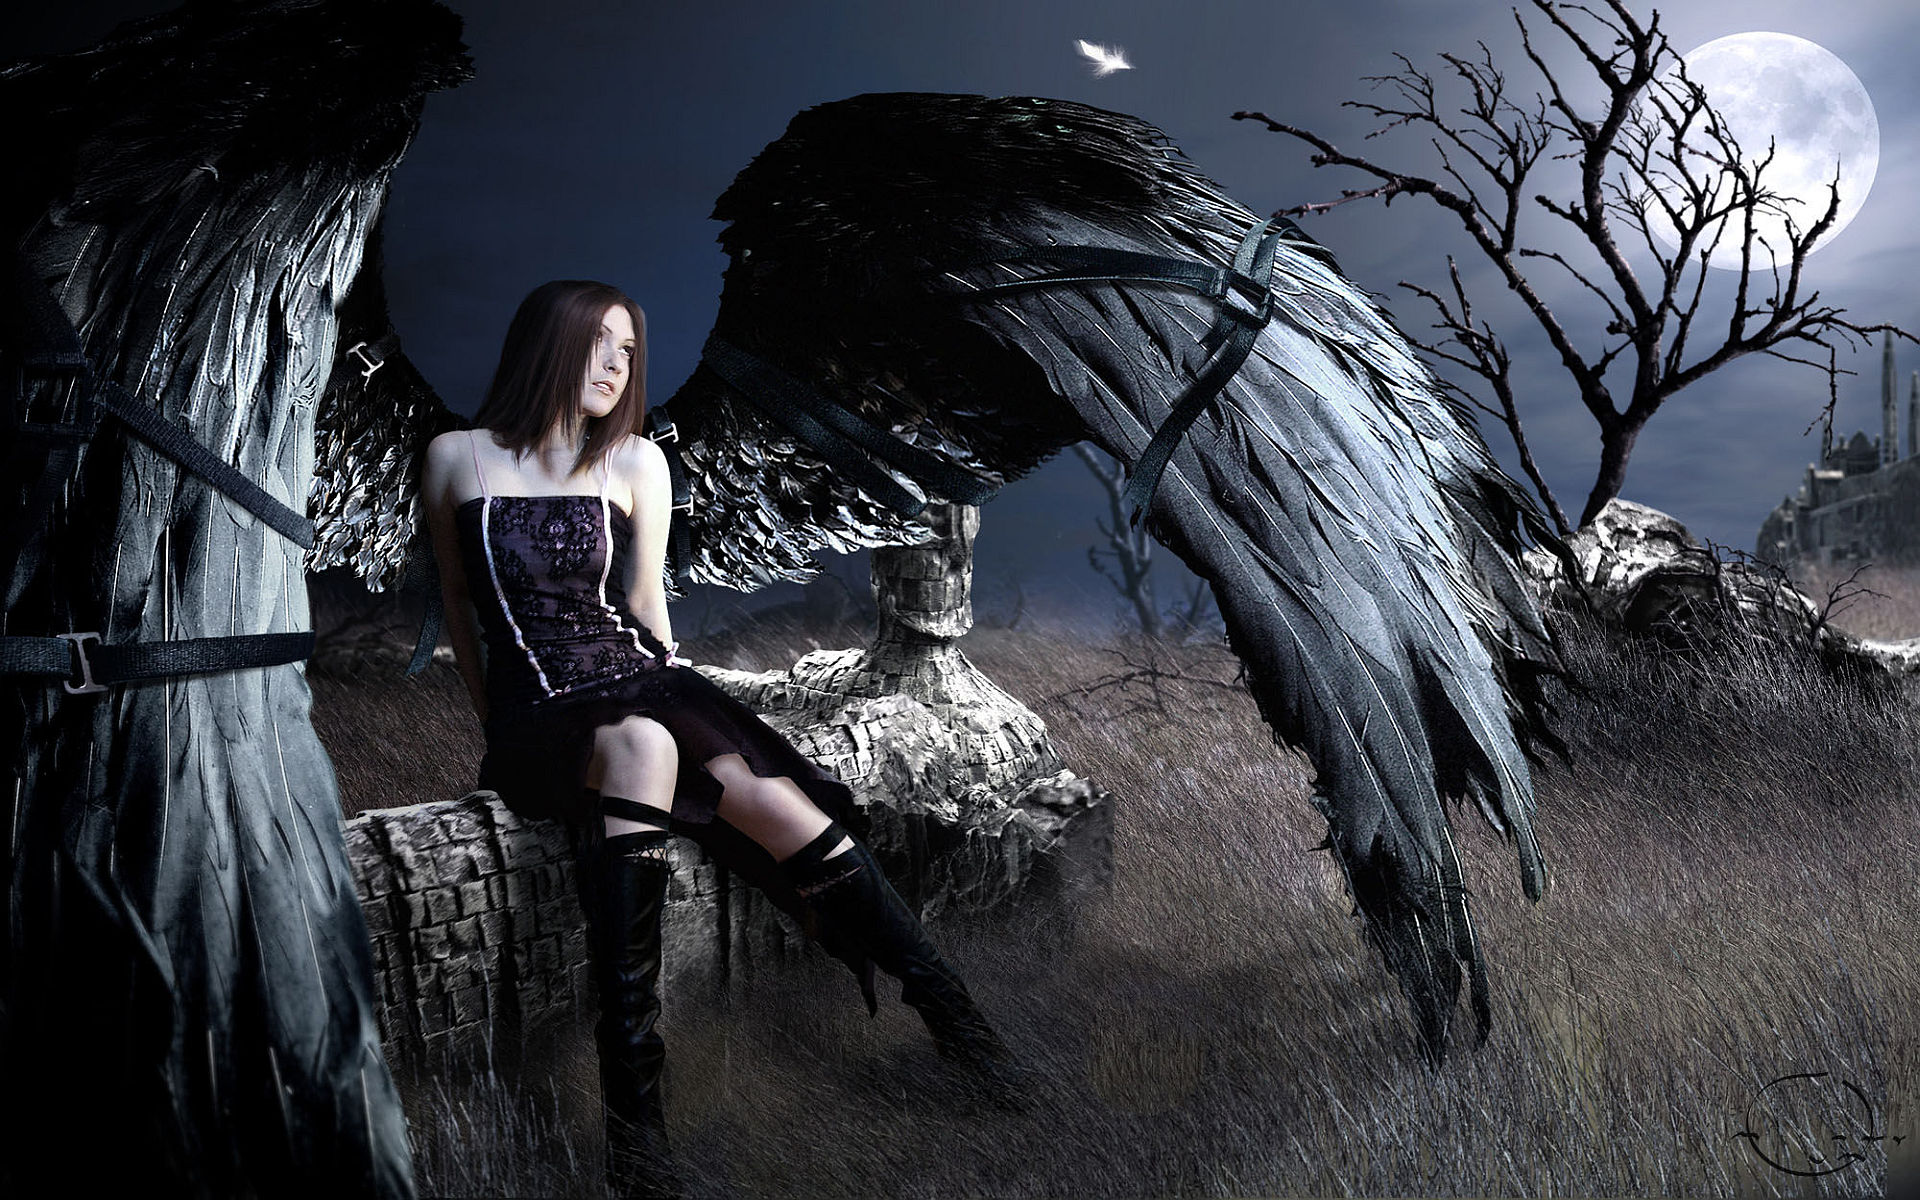 Restraint - A captivating fantasy artwork featuring an angel cosplay character.